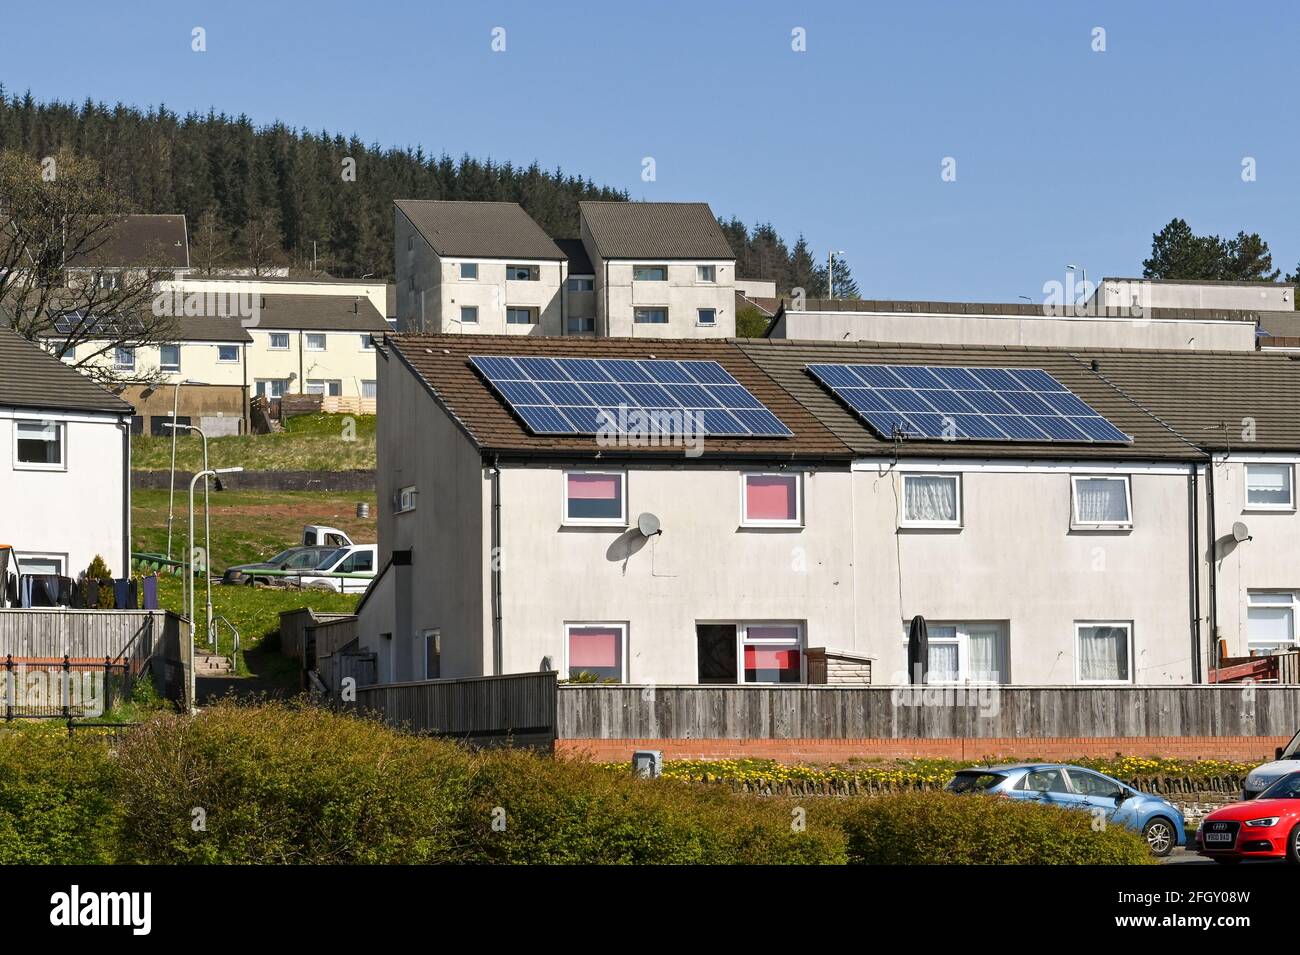 Penrhys, Rhondda valley, Wales - April 2021: Social housing with solar panels on the roof in Penrhys in the Rhondda valley Stock Photo